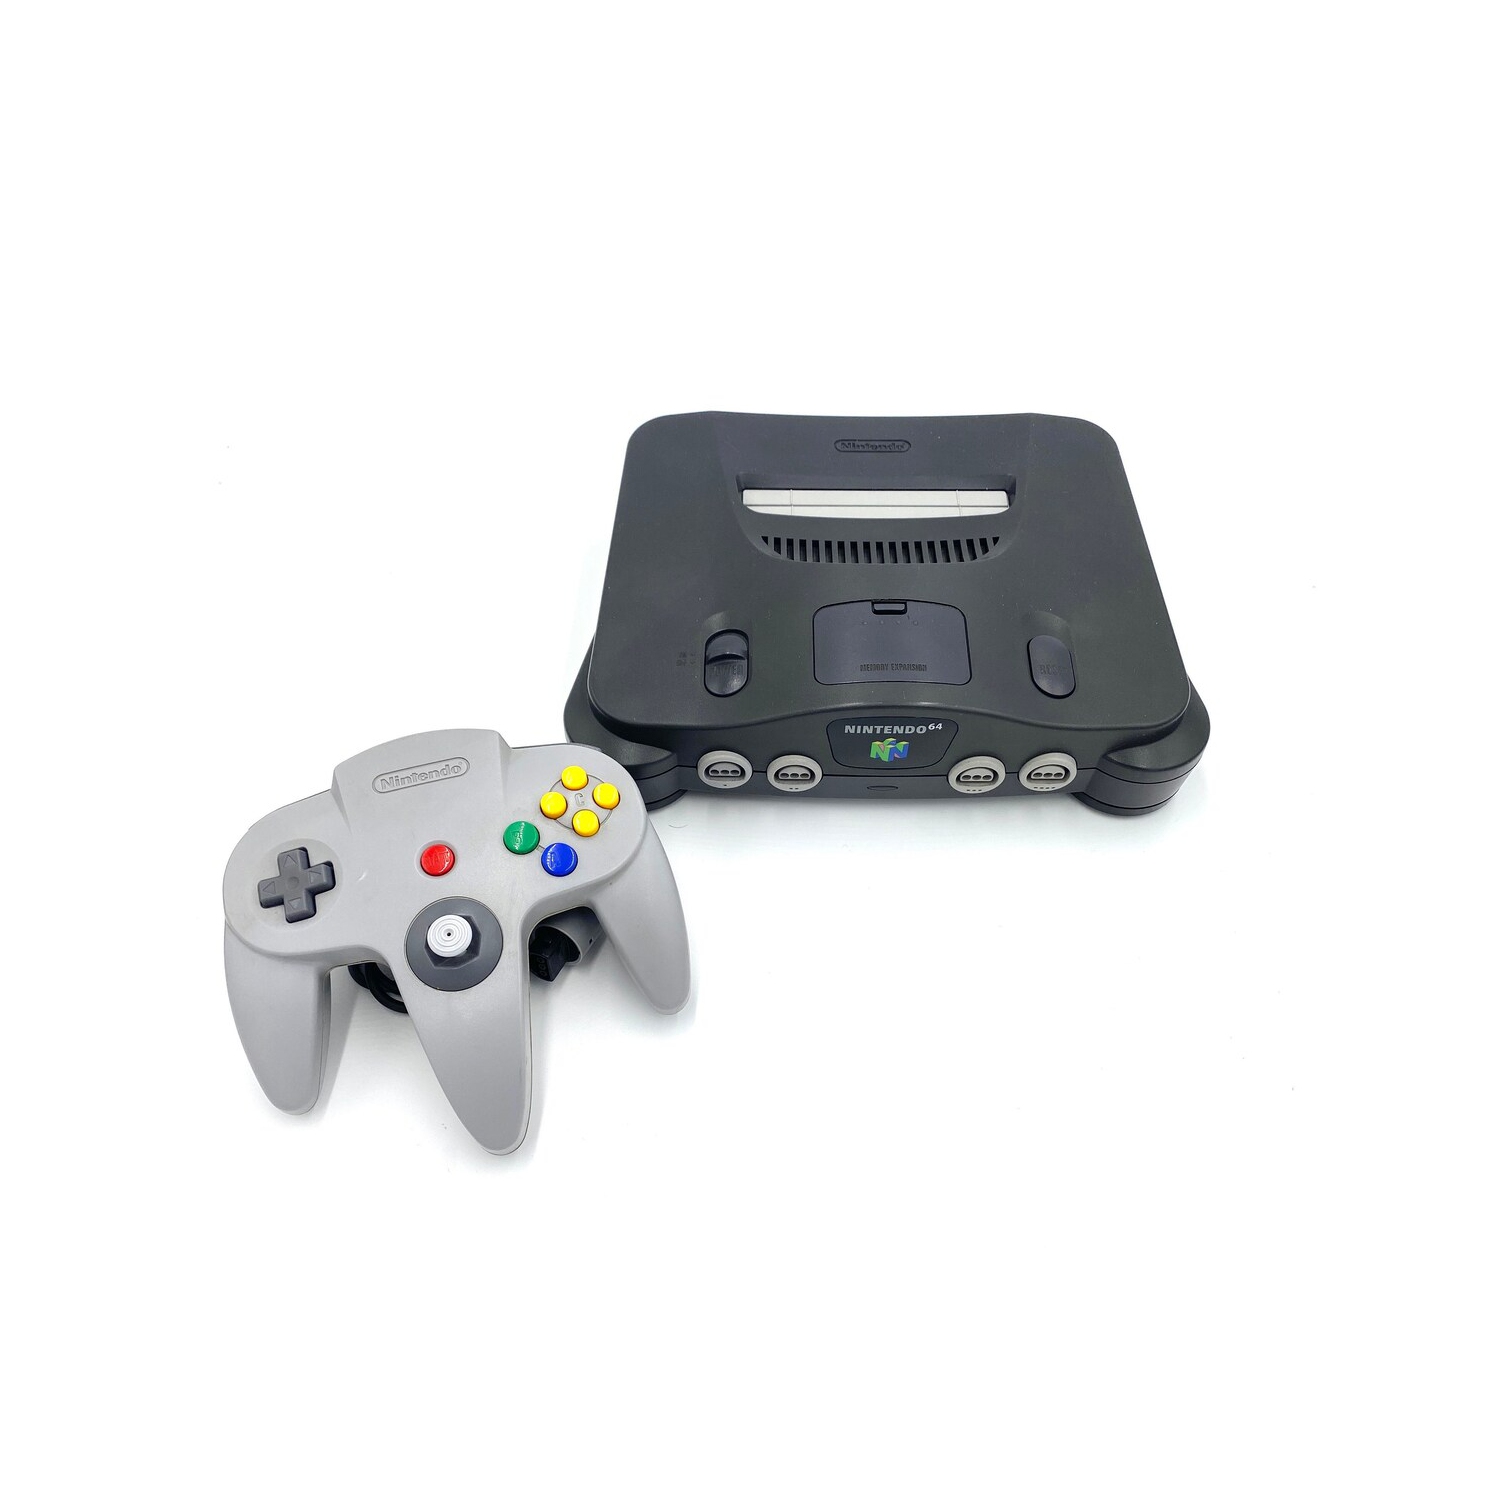 Authentic Refurbished Excellent Nintendo 64 Game Console with Replica Nintendo 64 Box and Tray